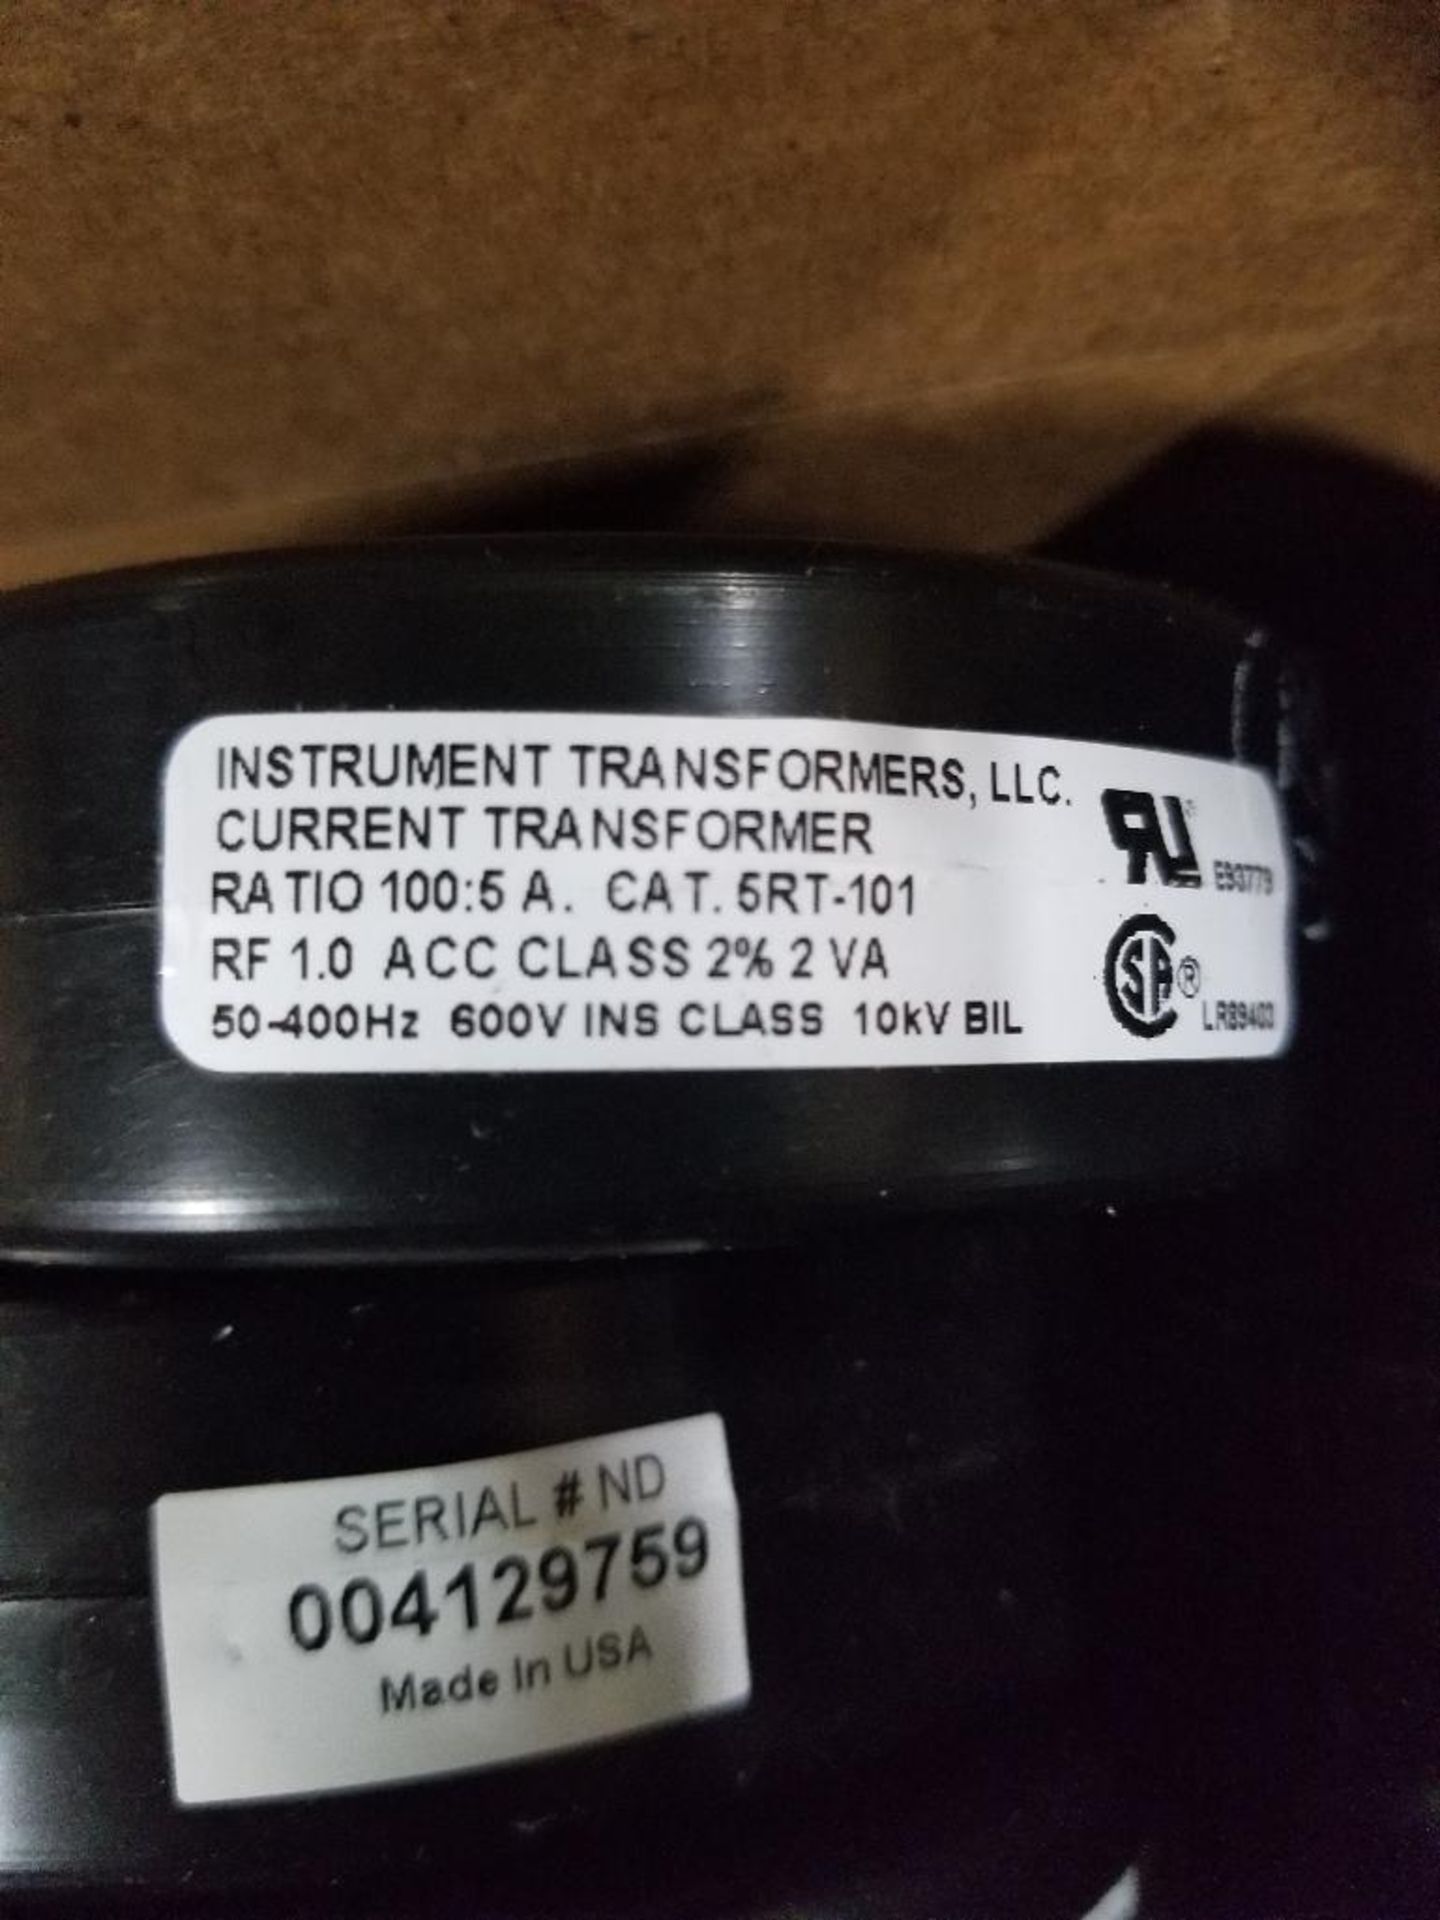 Qty 28 - Instrument Tranformers current transformer. Model 5RT-101. New as pictured.